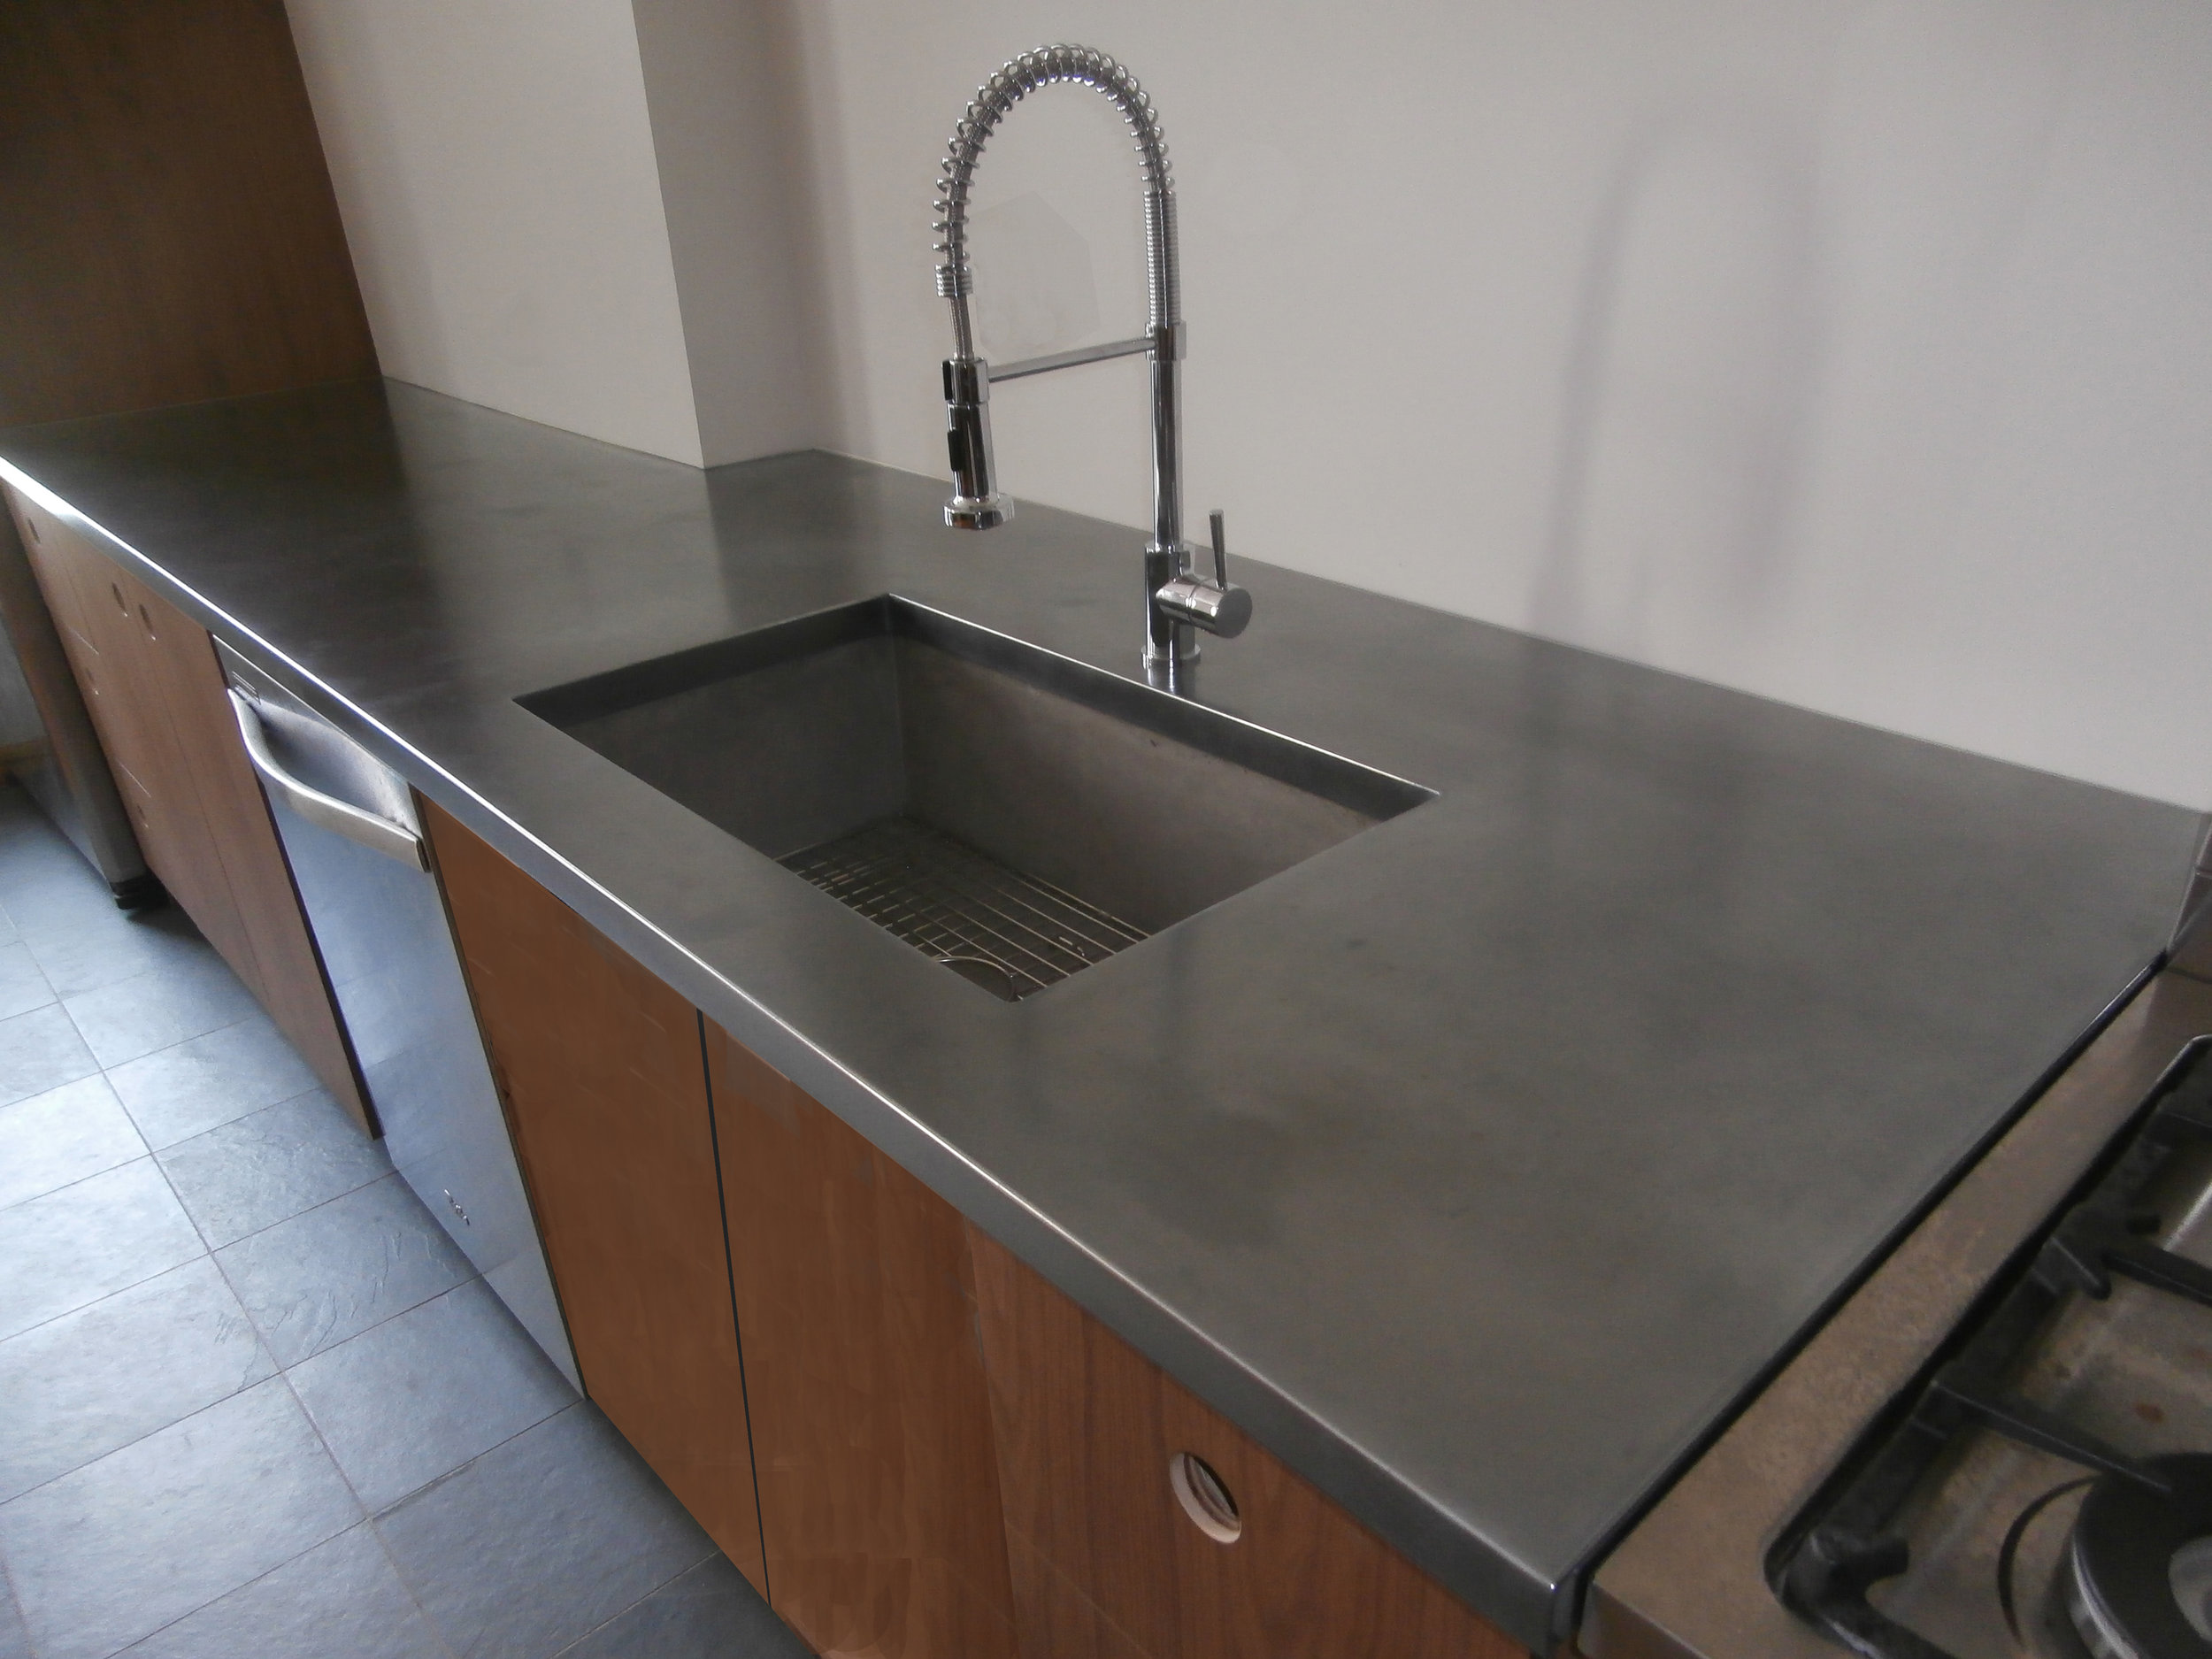 Artisan Cast Stainless Steel Countertops and Hoods